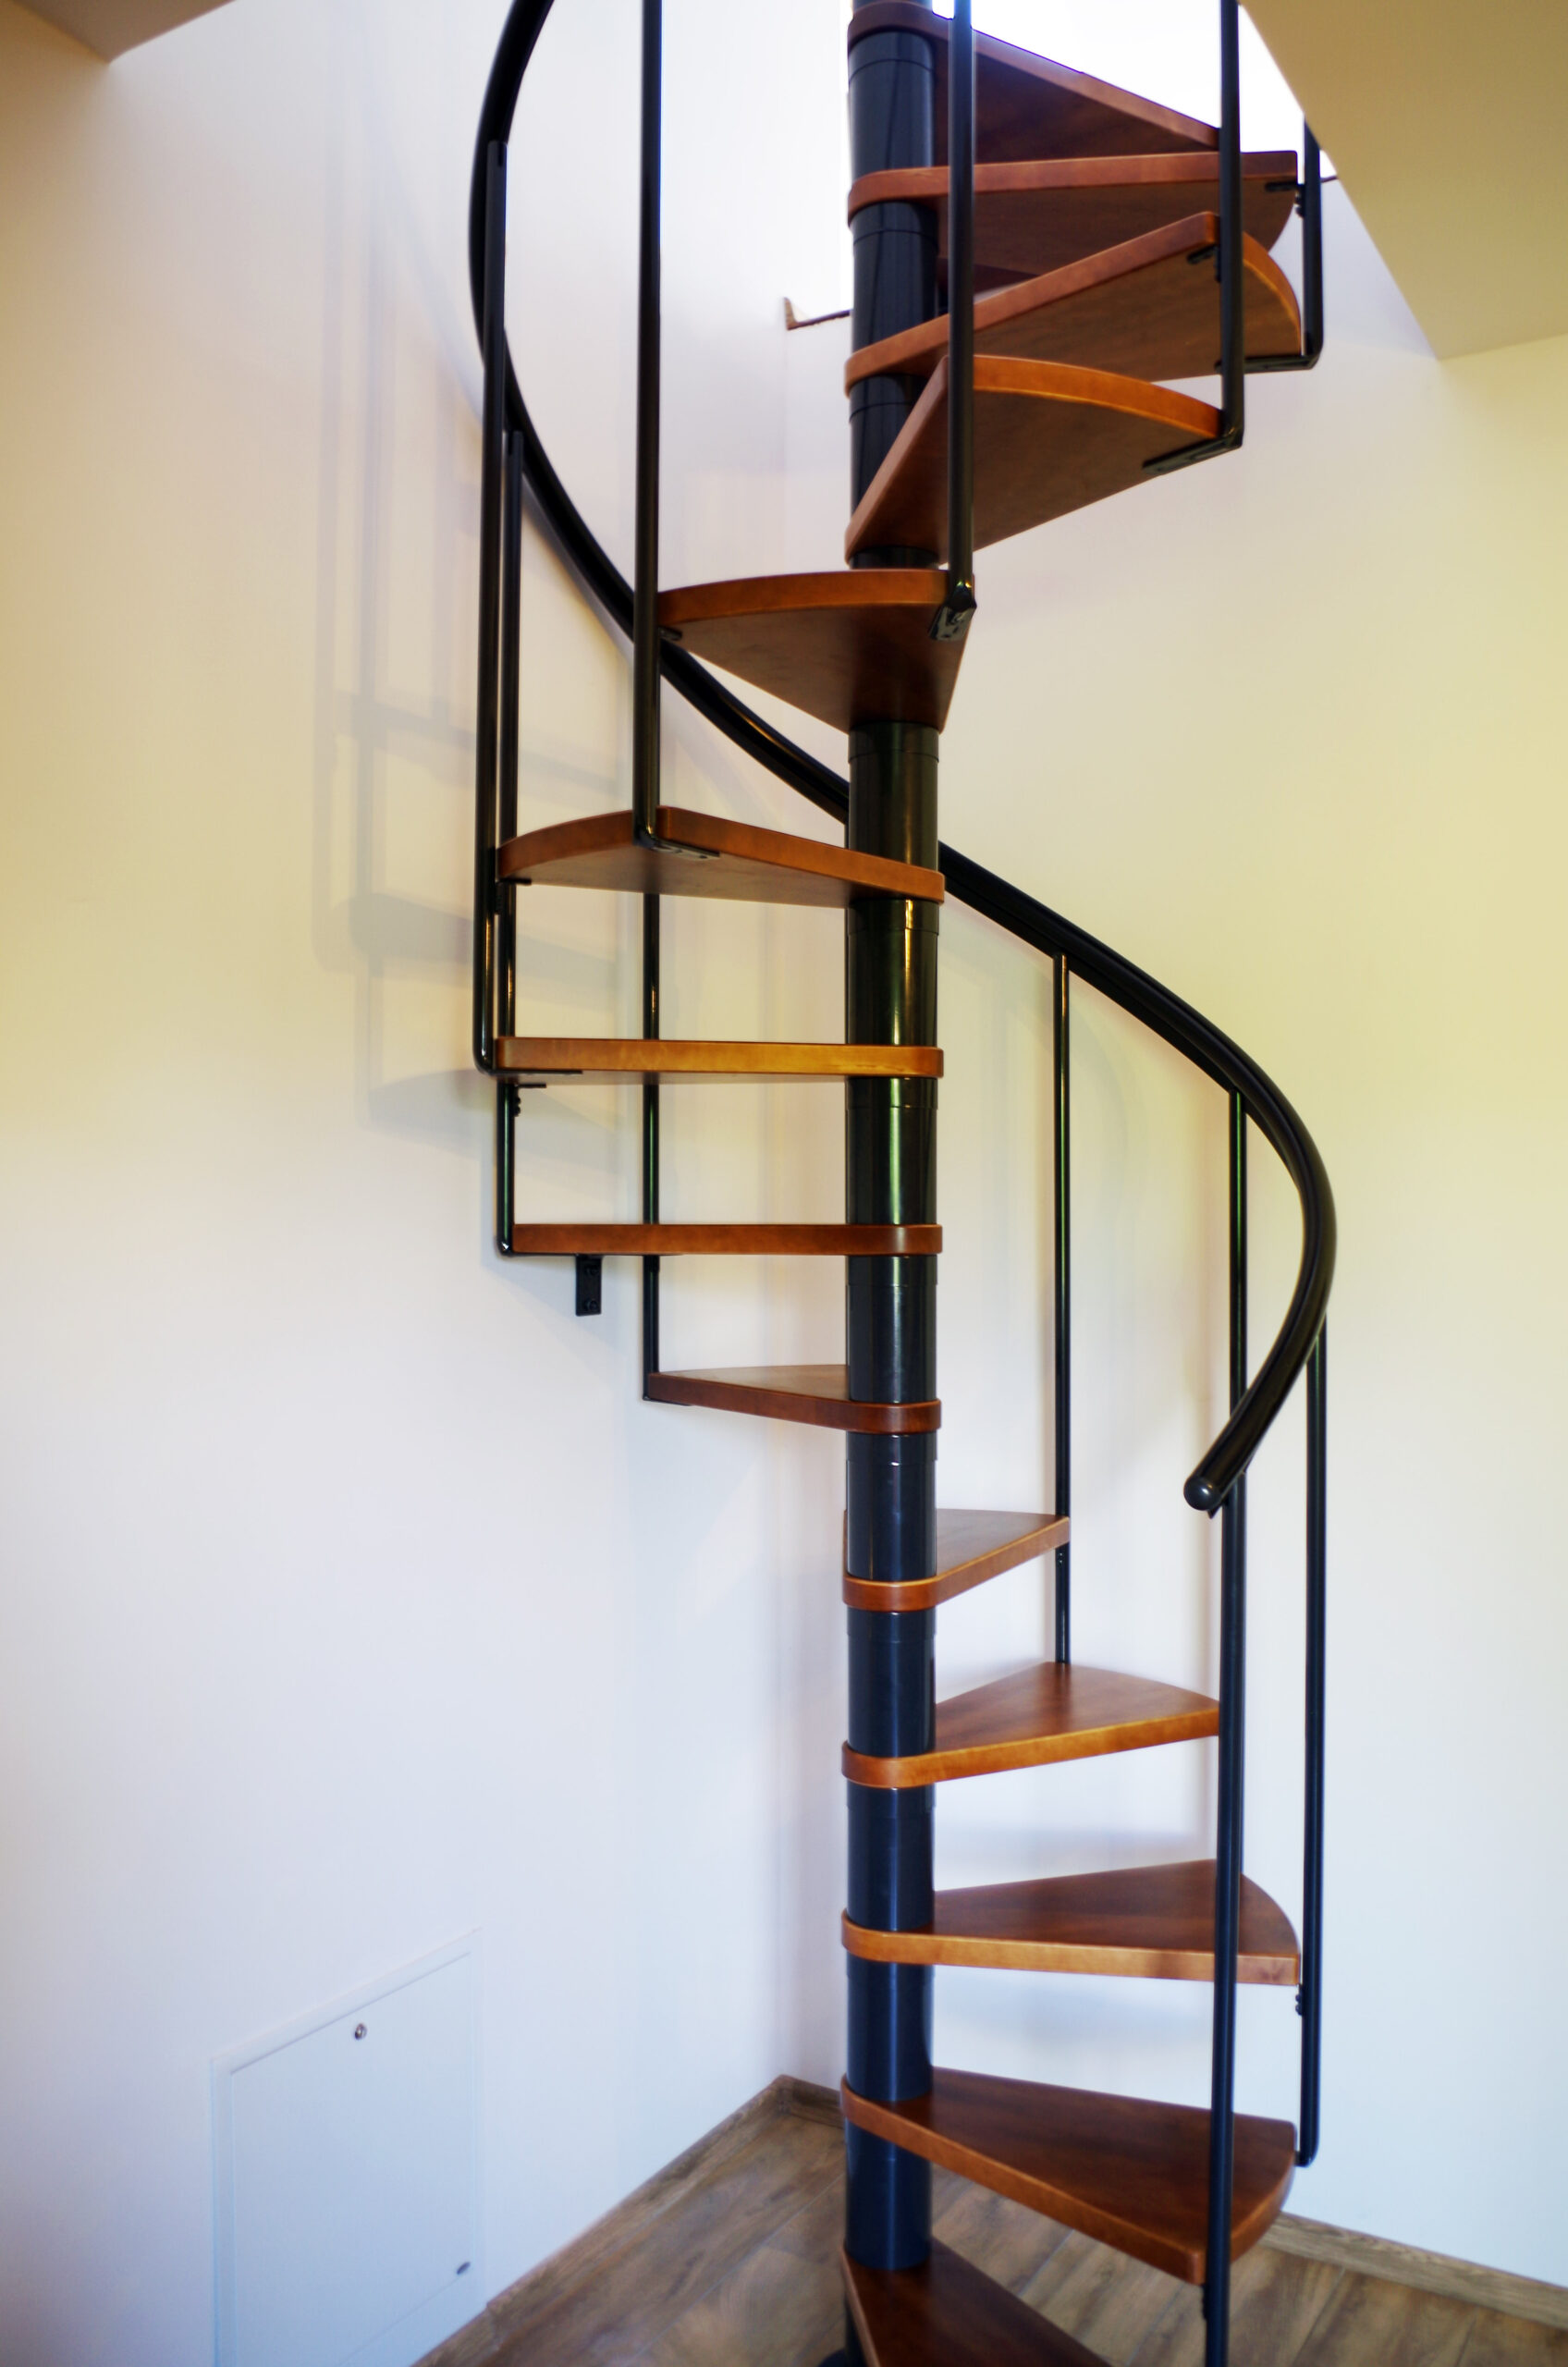 M100 Spiral Staircase Anthracite/Honey Beech 100cm